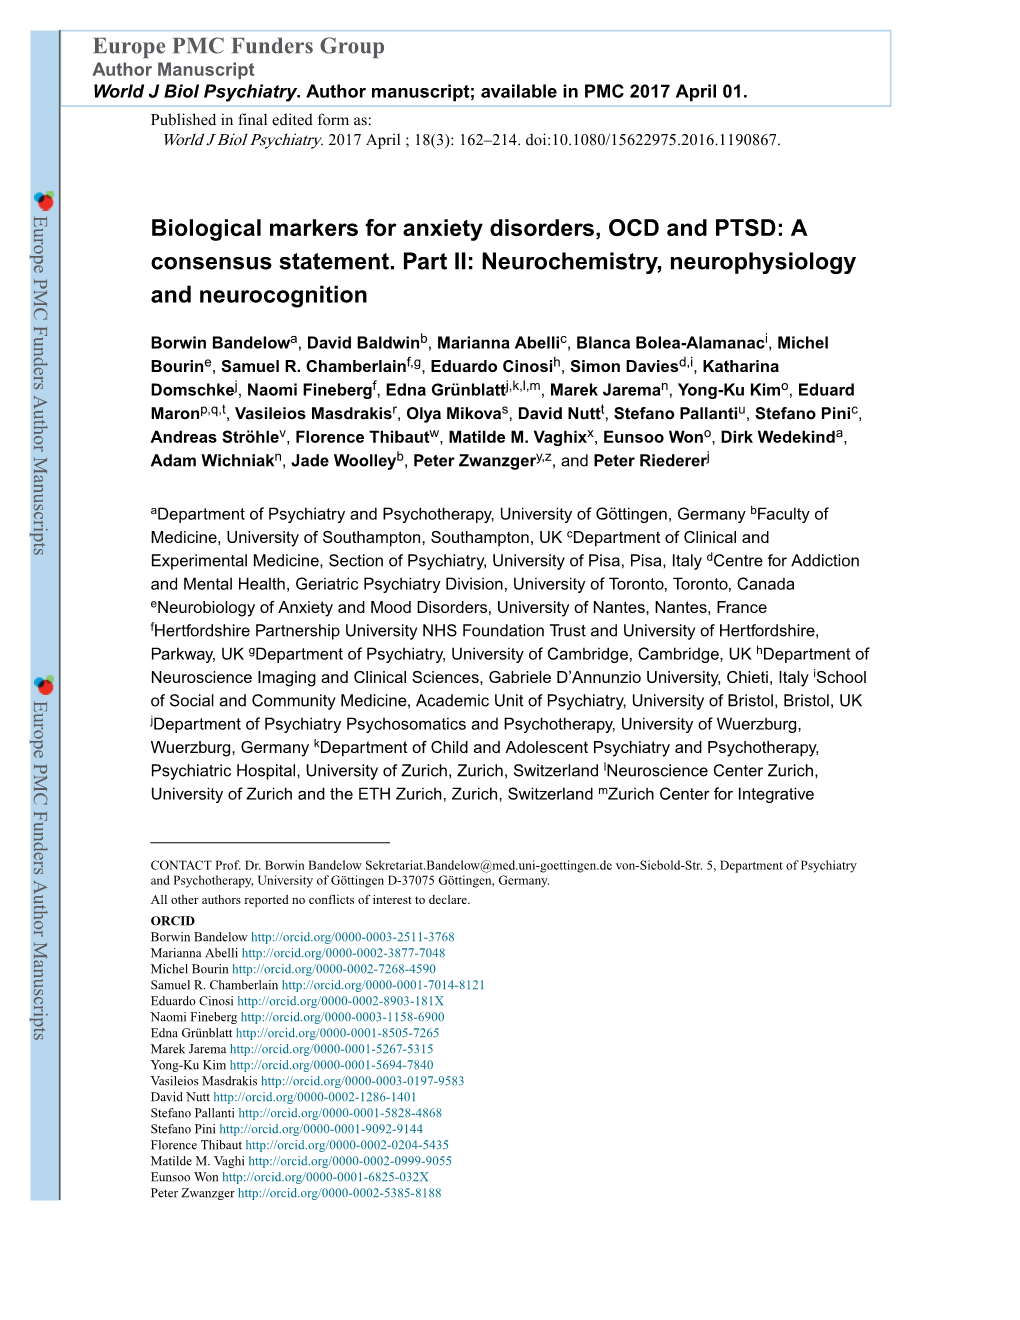 Biological Markers for Anxiety Disorders, OCD and PTSD: a Consensus Statement